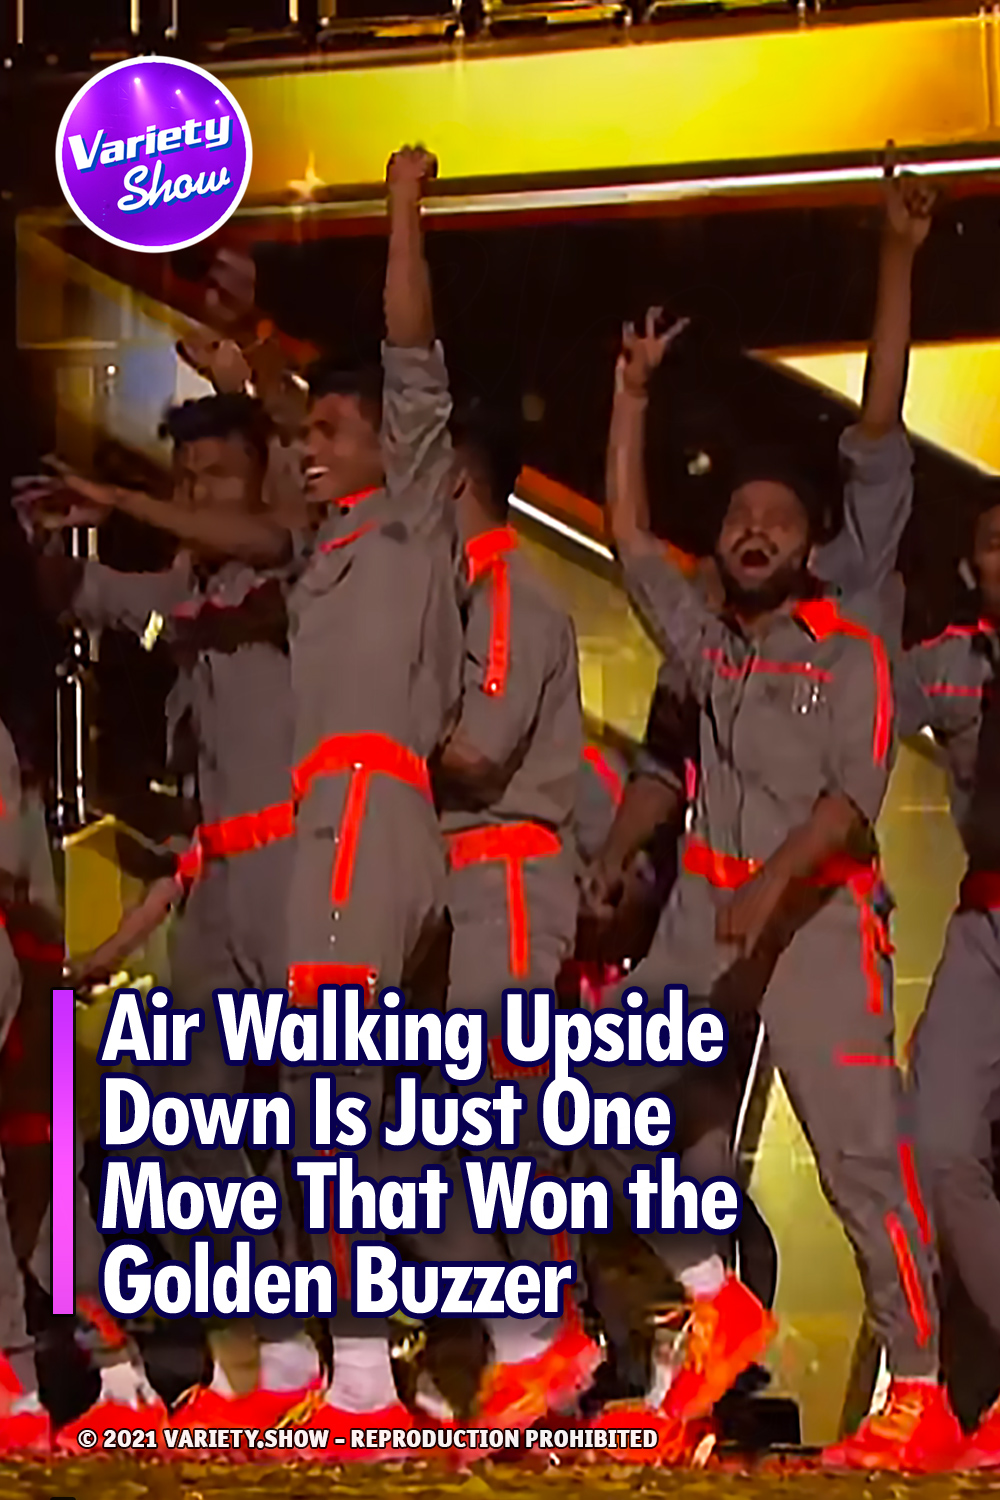 Air Walking Upside Down Is Just One Move That Won the Golden Buzzer